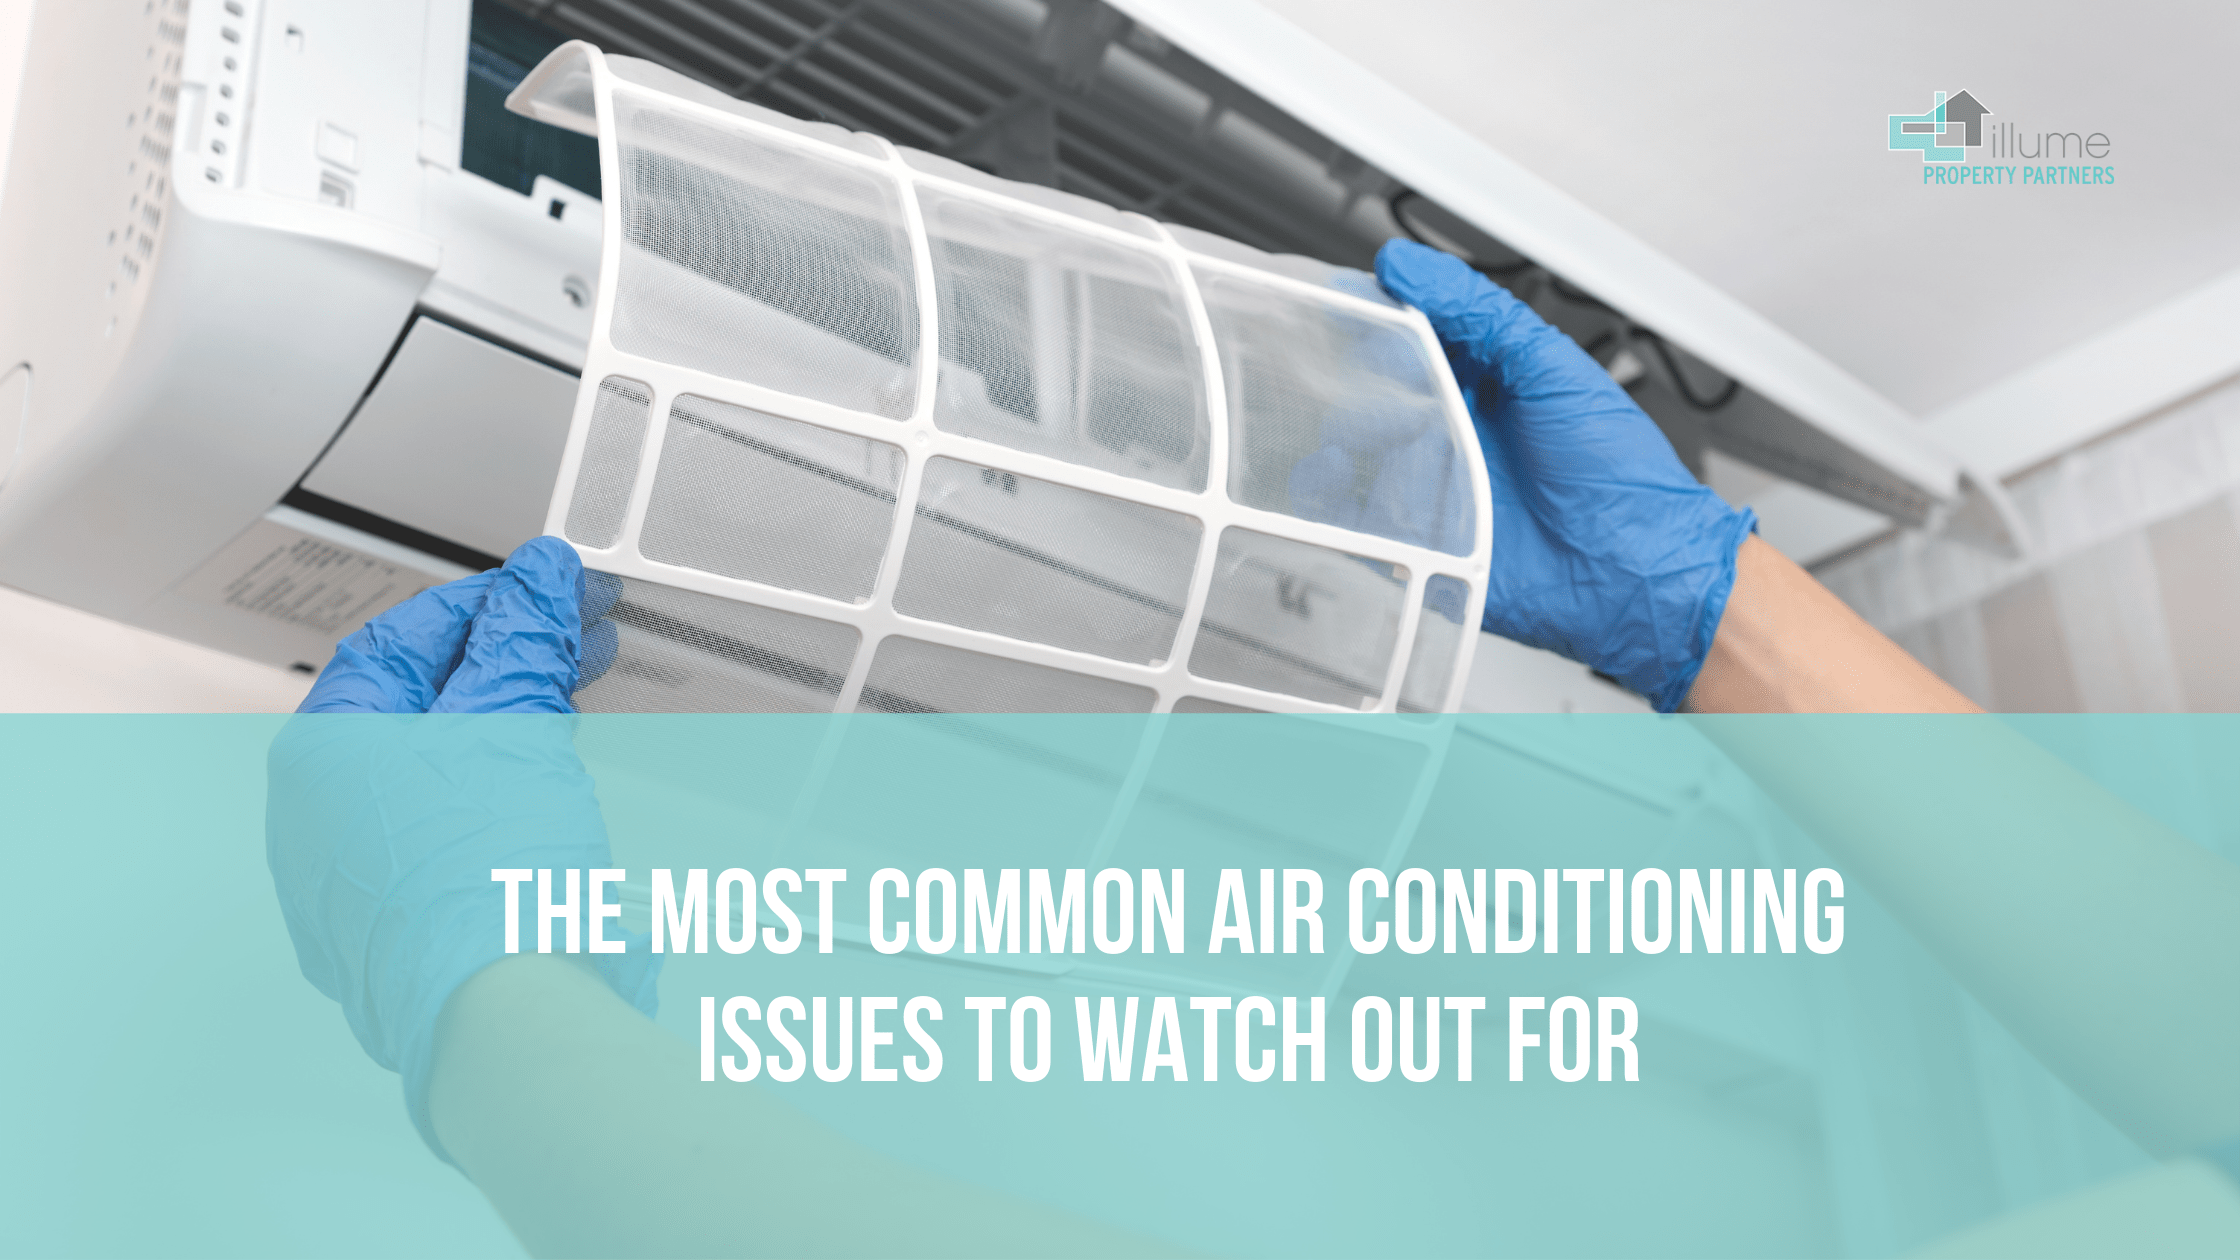 The Most Common Air Conditioning Issues to Watch Out For